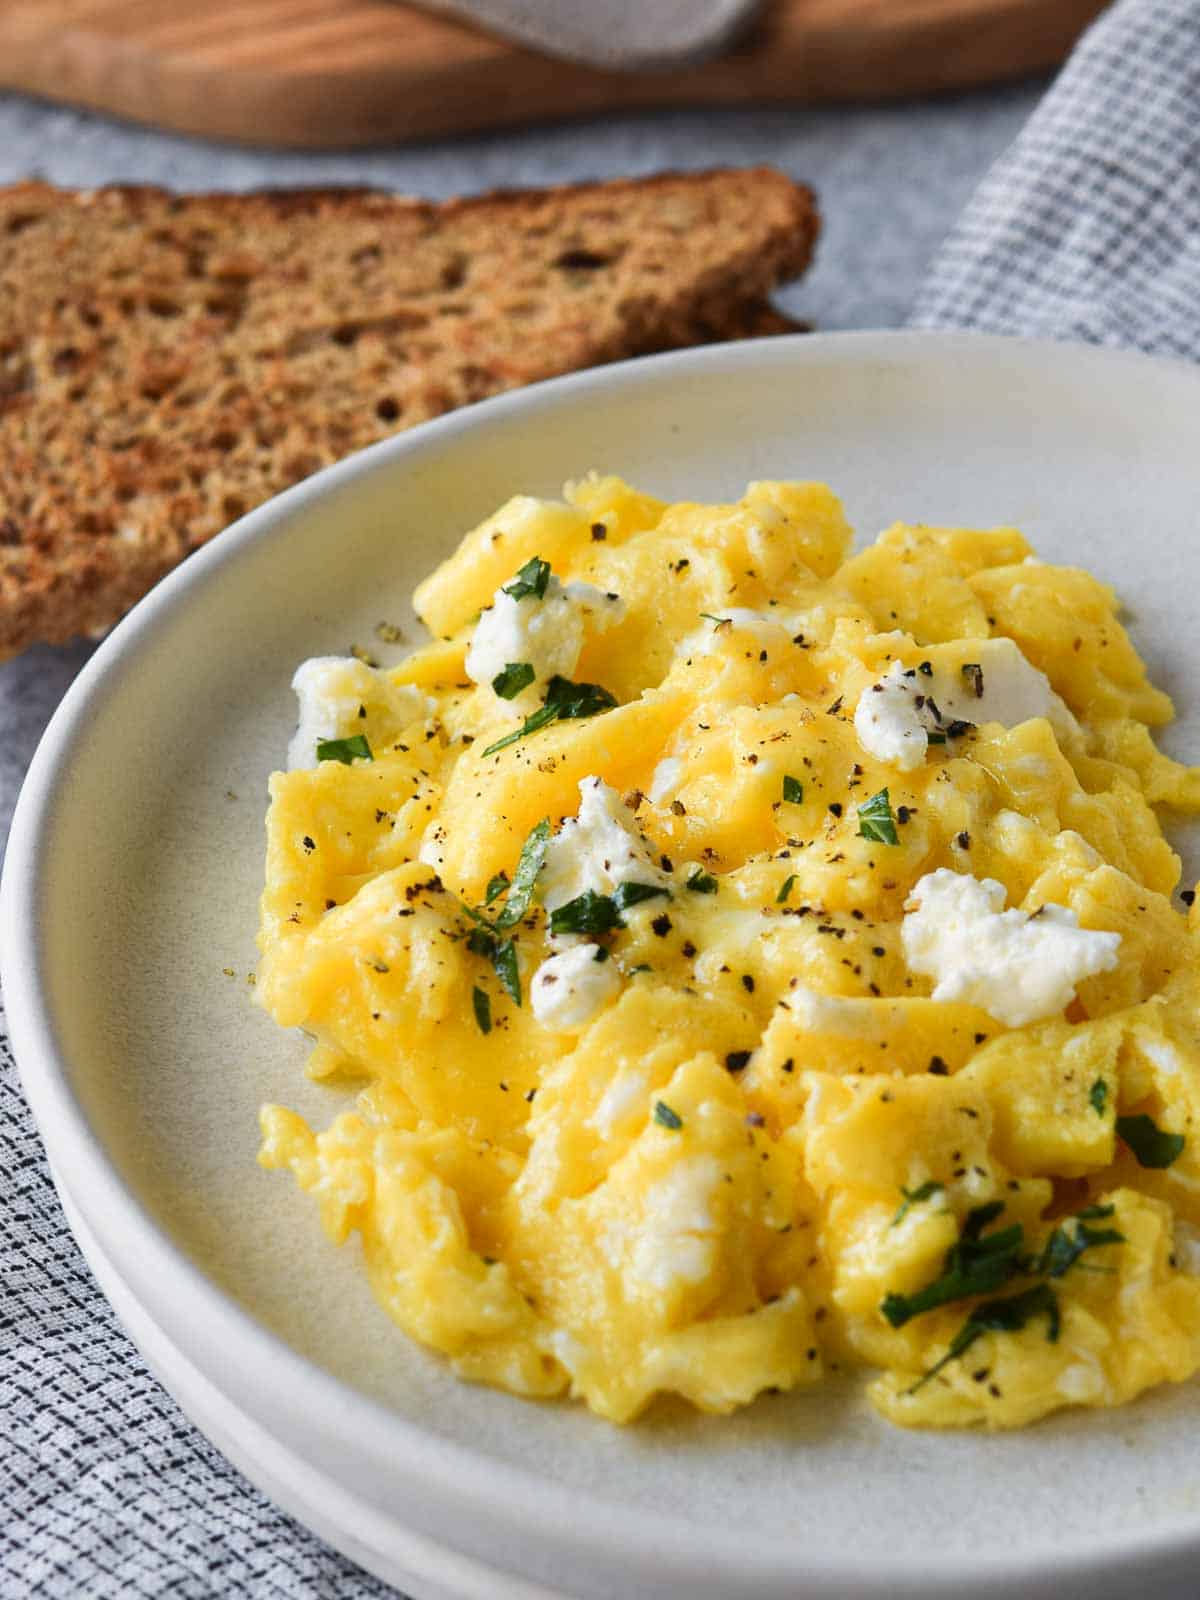 Scrambled eggs with goat cheese on a white plate with toast in the background.